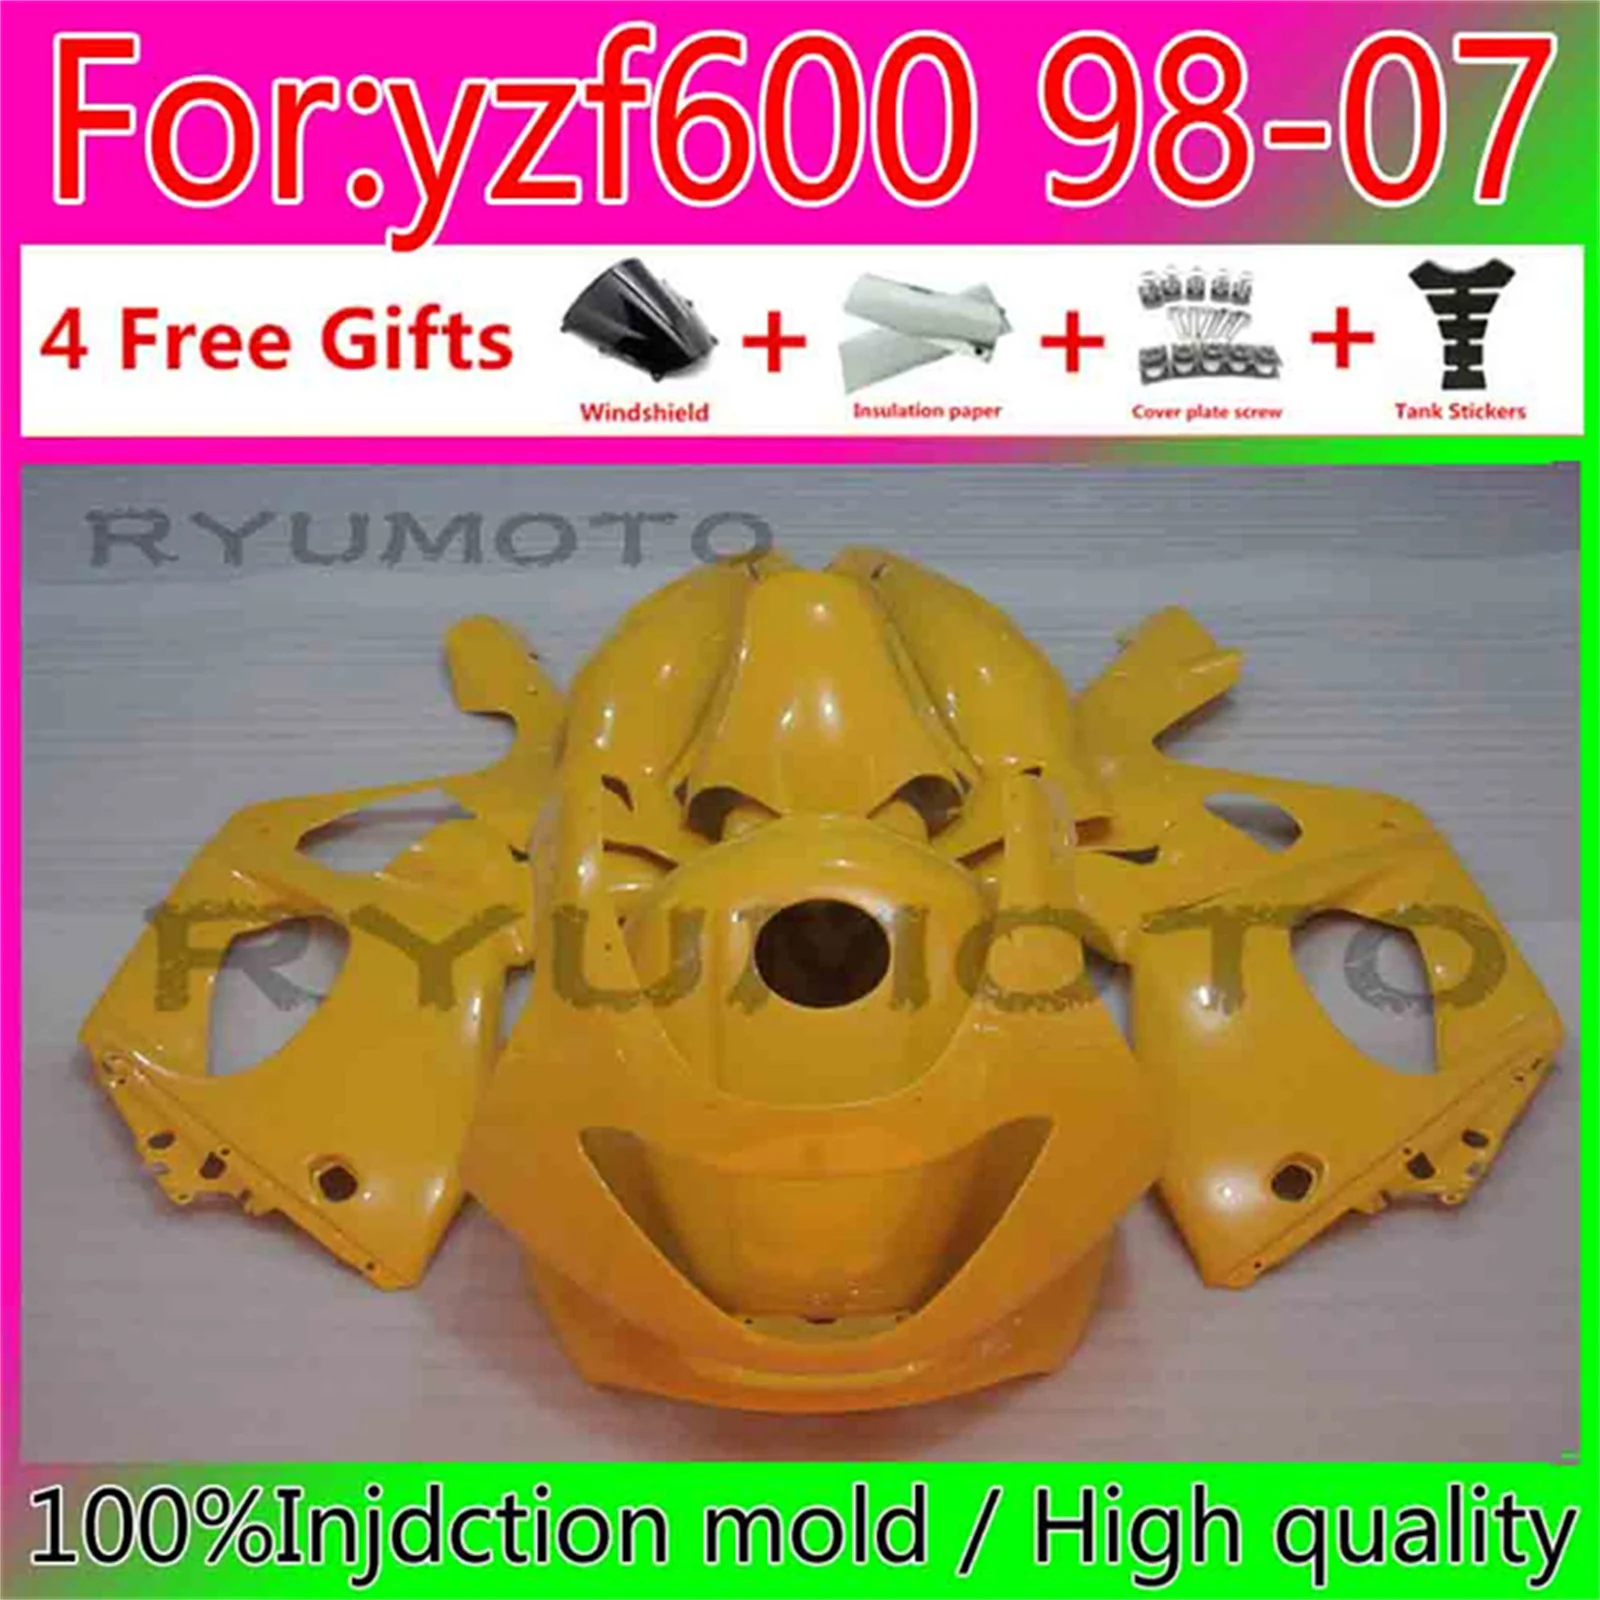 

Motorcycle Injection ABS Kit Fairings For Yamaha YZF 600 1997-2007 YZF600 97 98 99 00 01 02 03 04 05 06 07 Fairings yellow